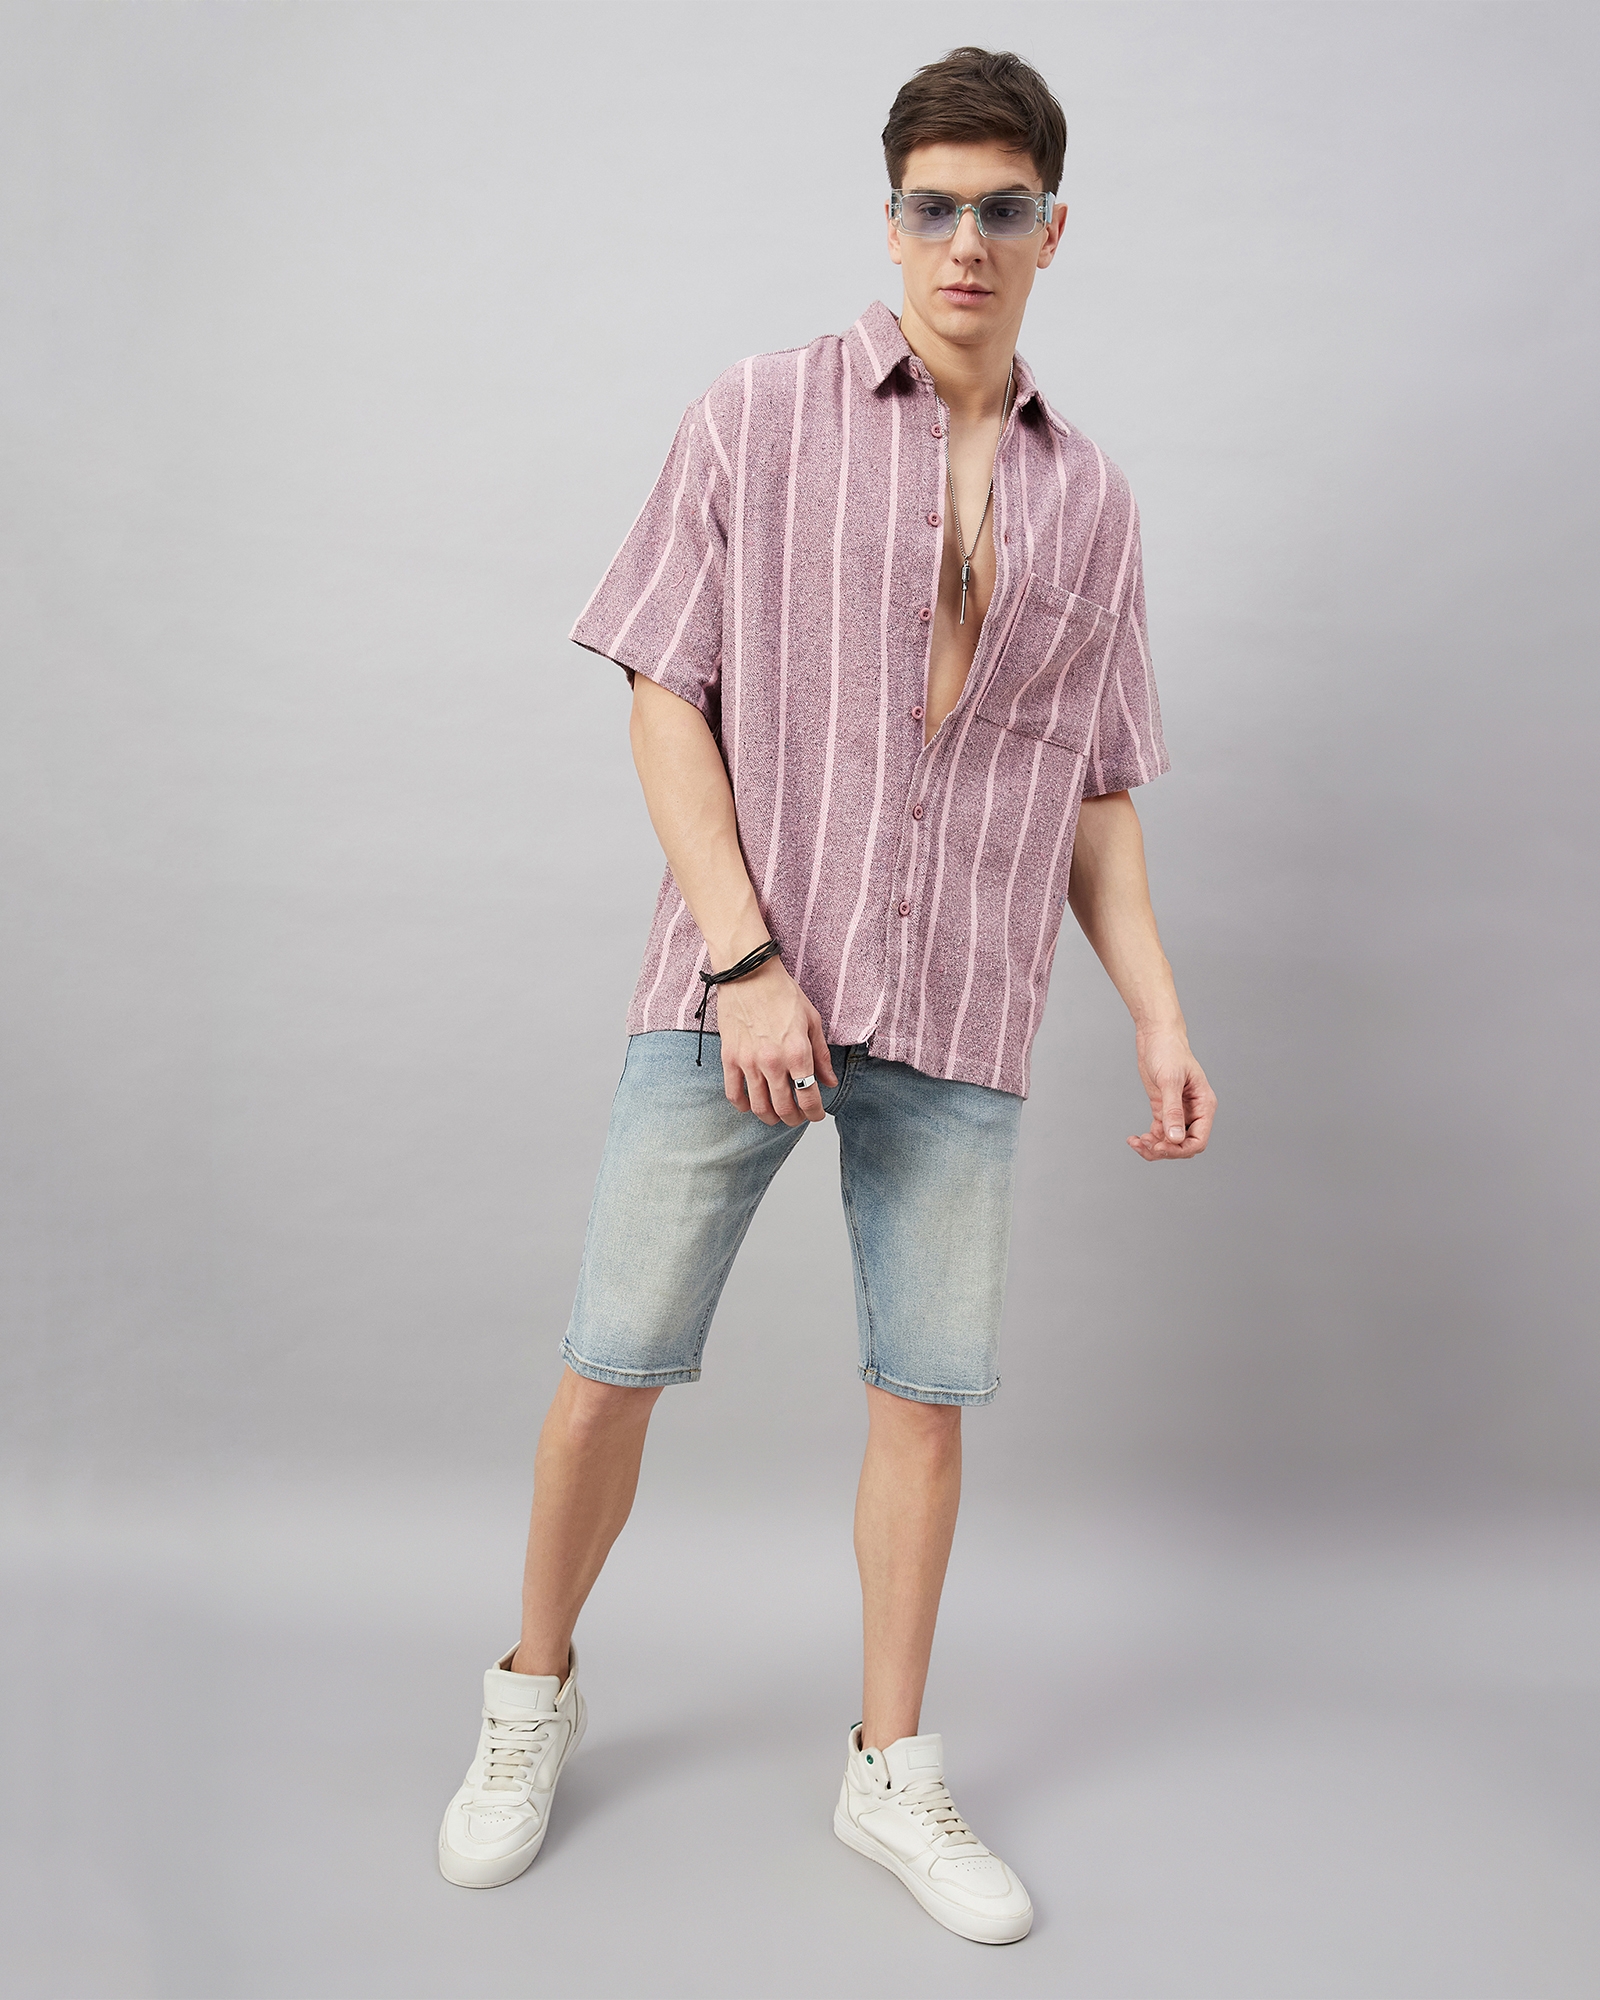 Chimpaaanzee Men Pink and White Oversized Fit Shirt